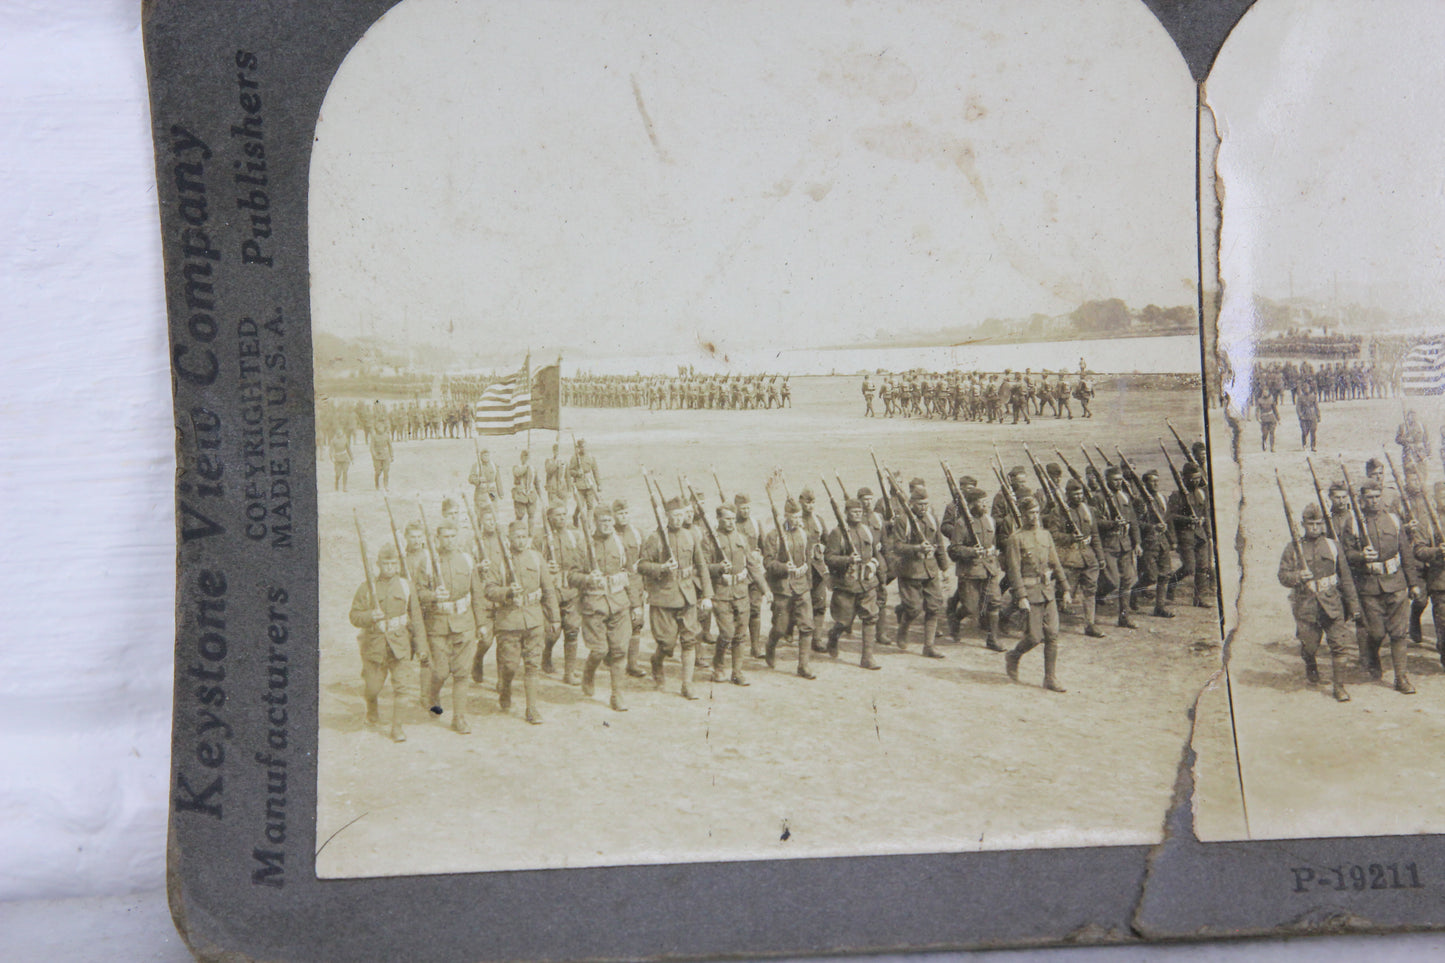 U.S. Soldiers in Germany, 23rd Infantry on Review - Keystone Stereo Card